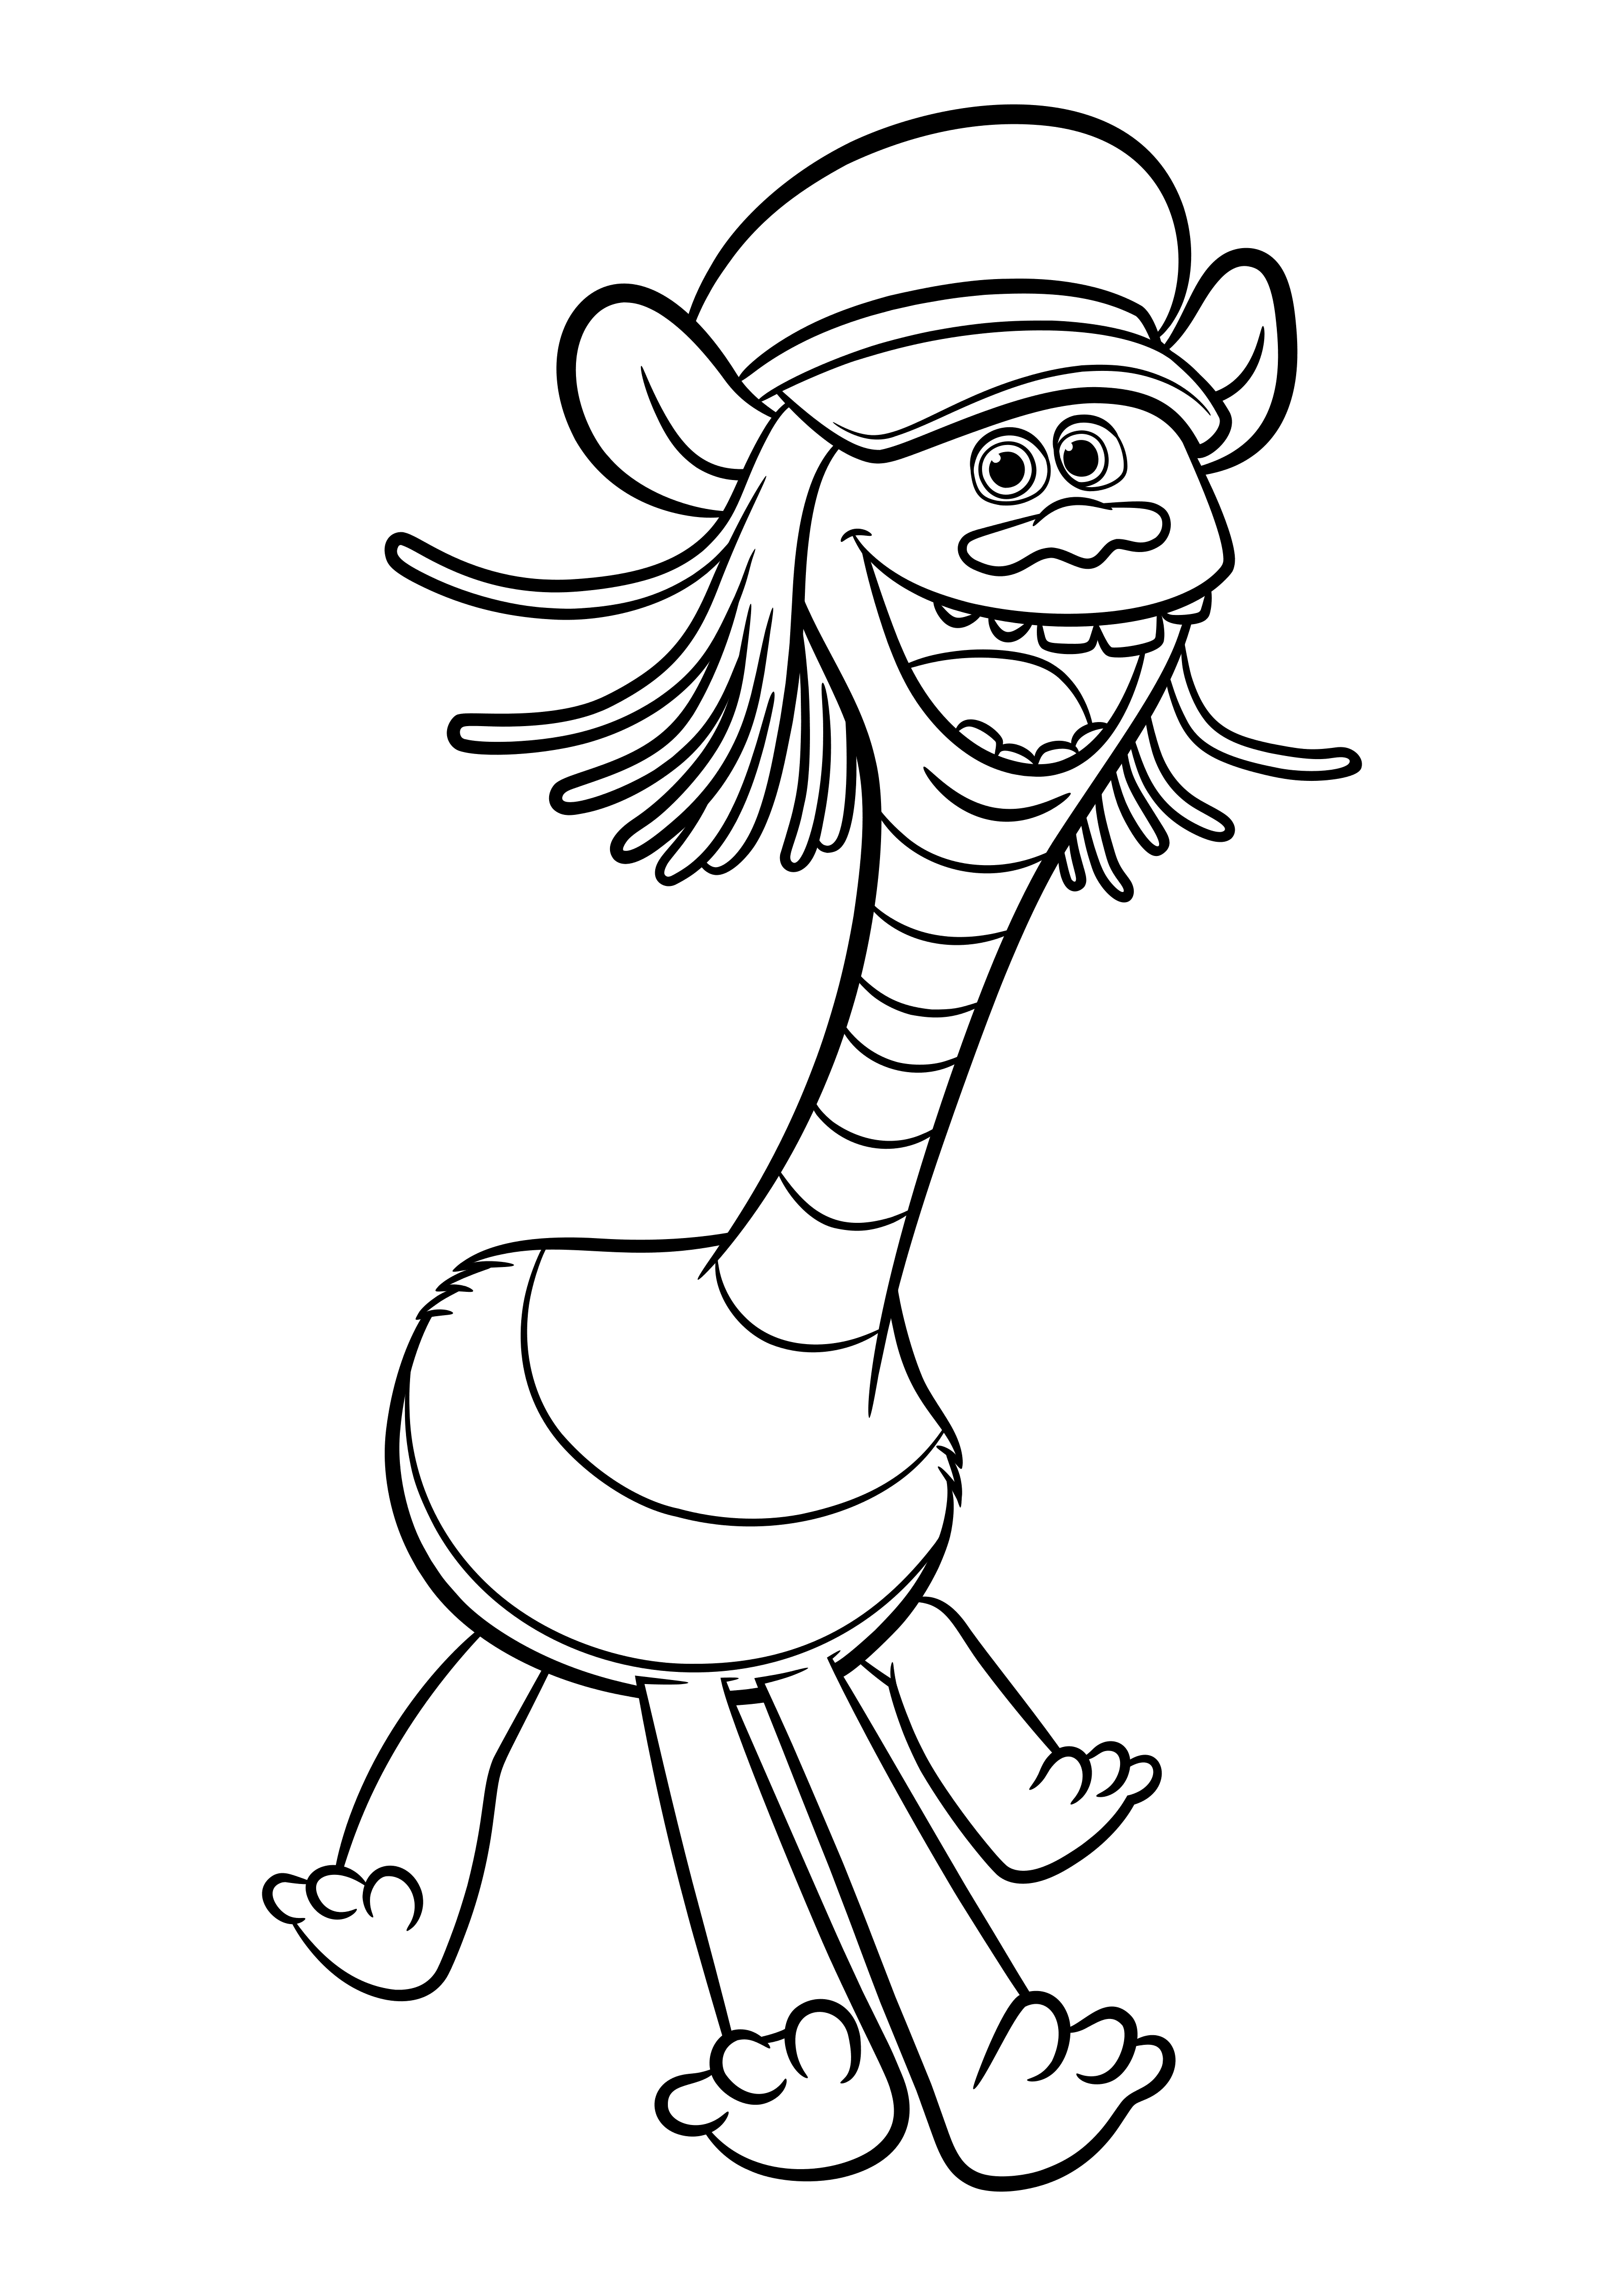 Printing Coloring Pages 3